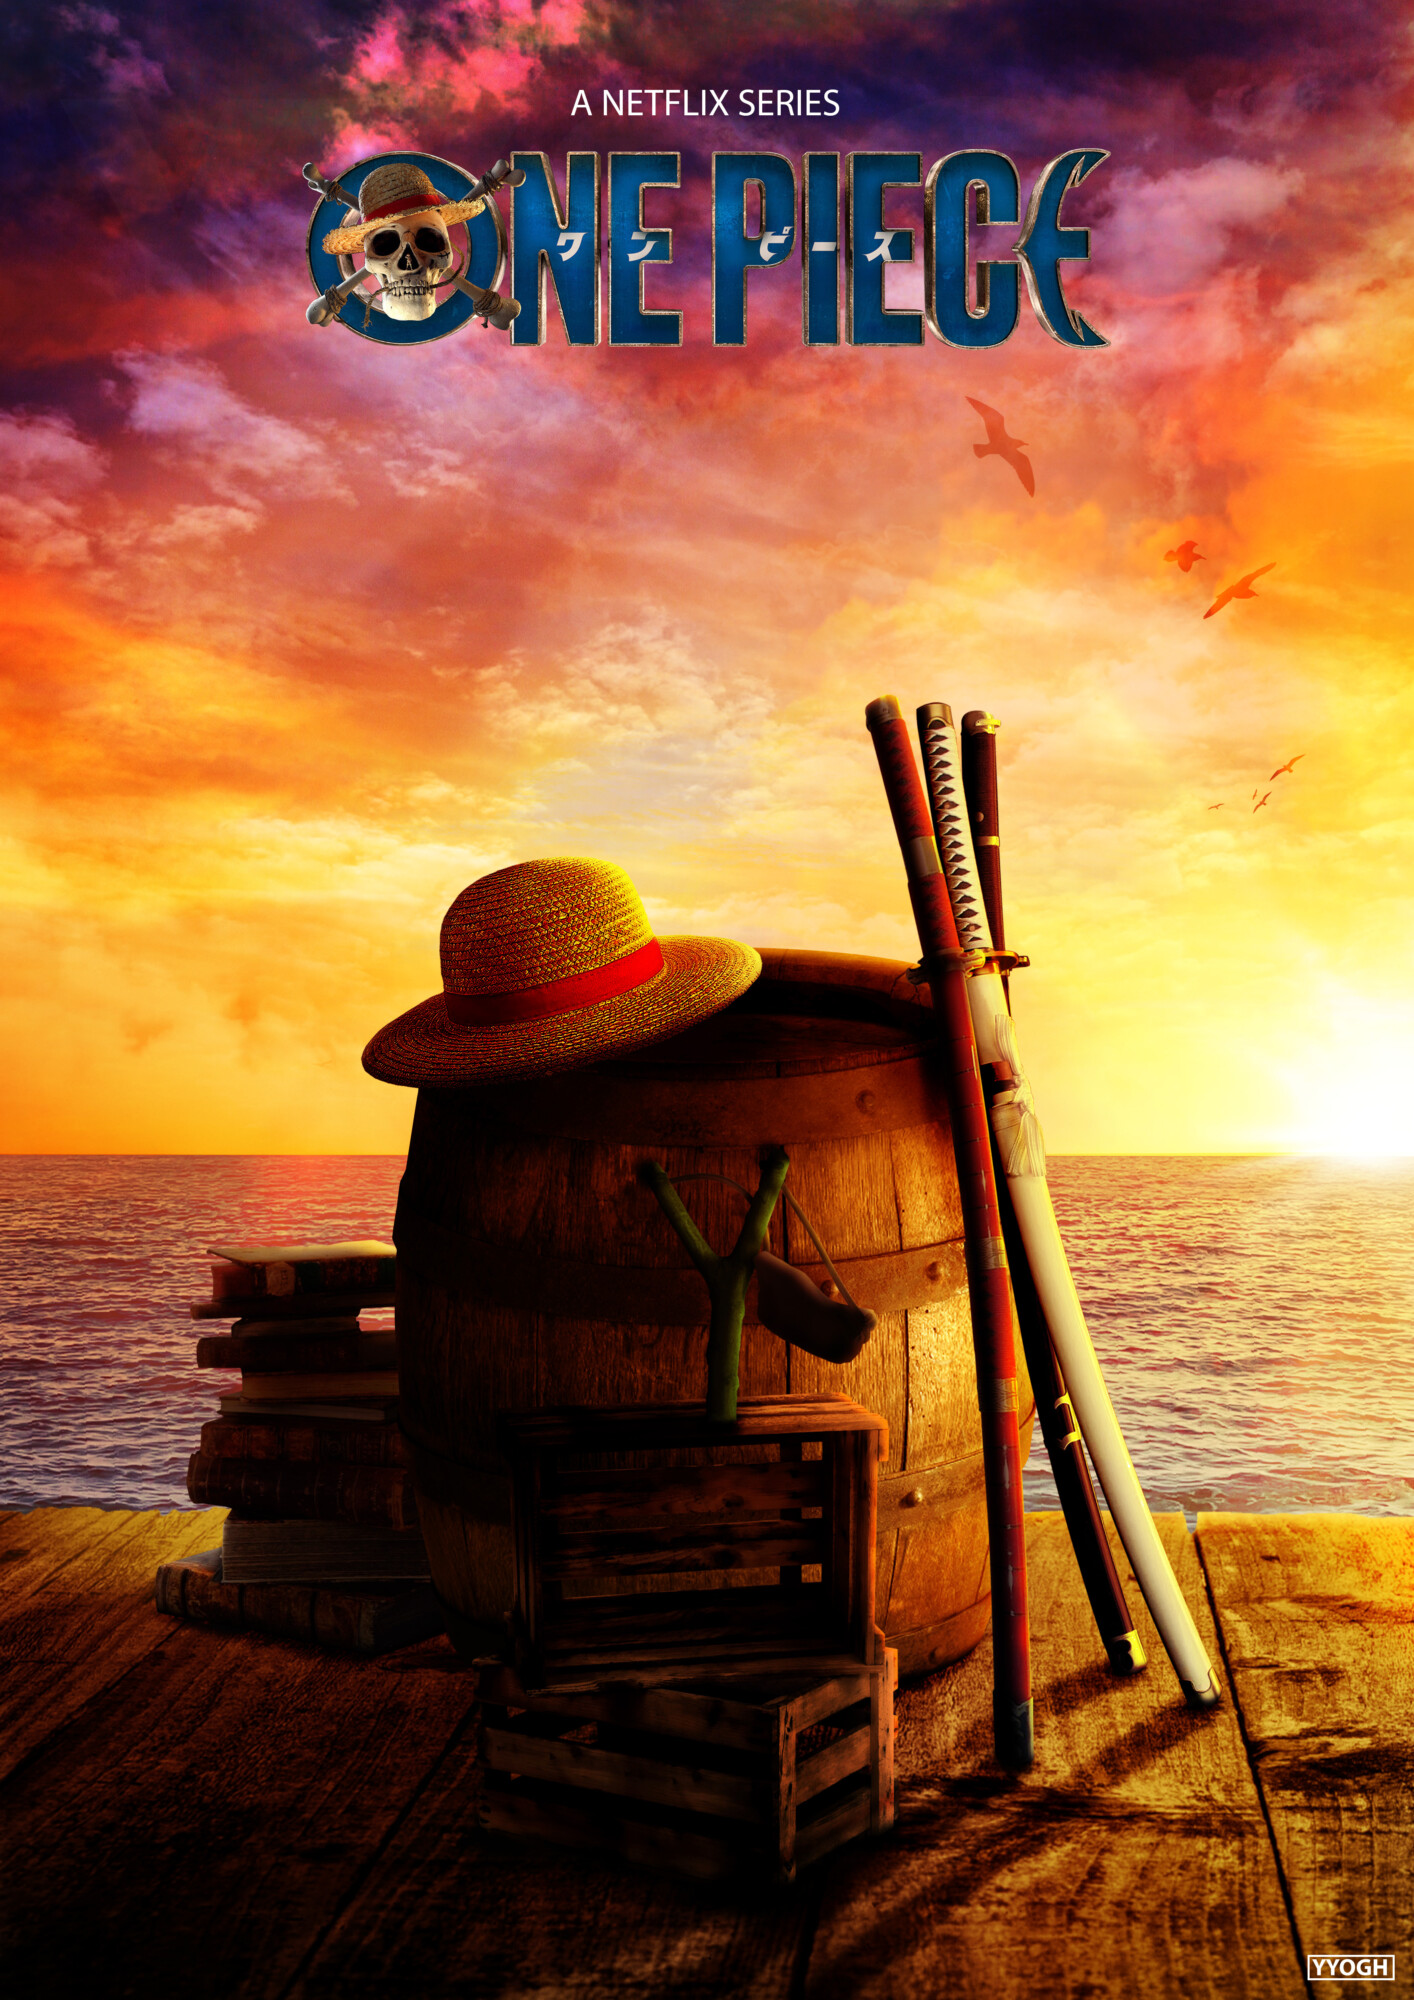 ONE PIECE LIVE ACTION Poster Art, Yyogh